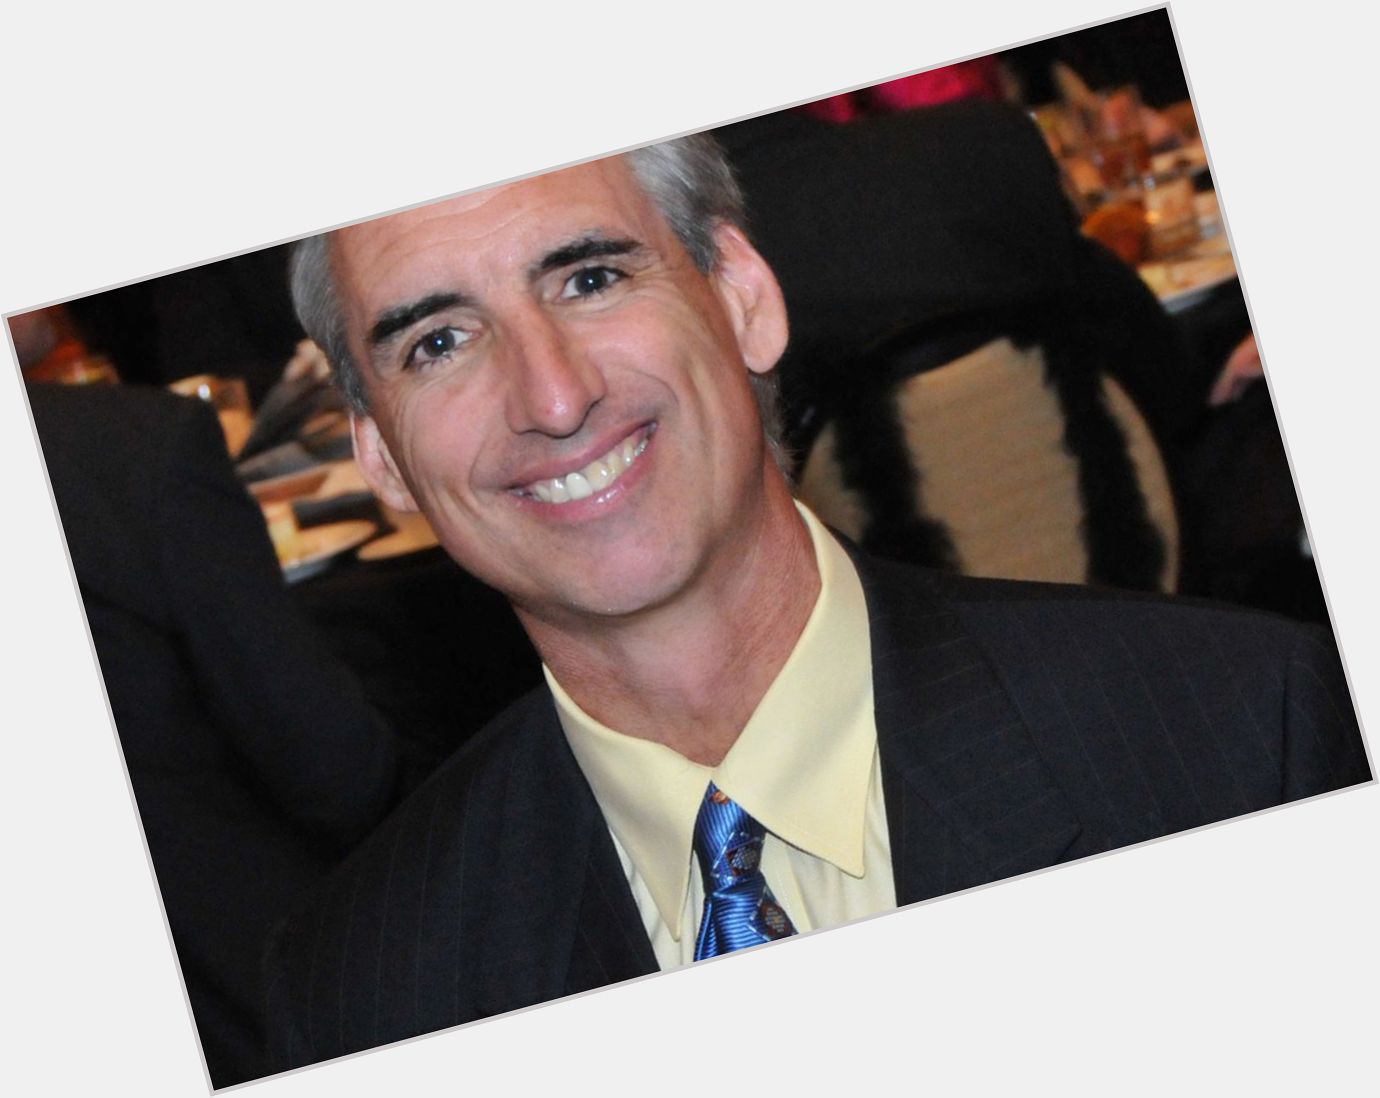 Https://fanpagepress.net/m/O/Oliver Luck New Pic 1